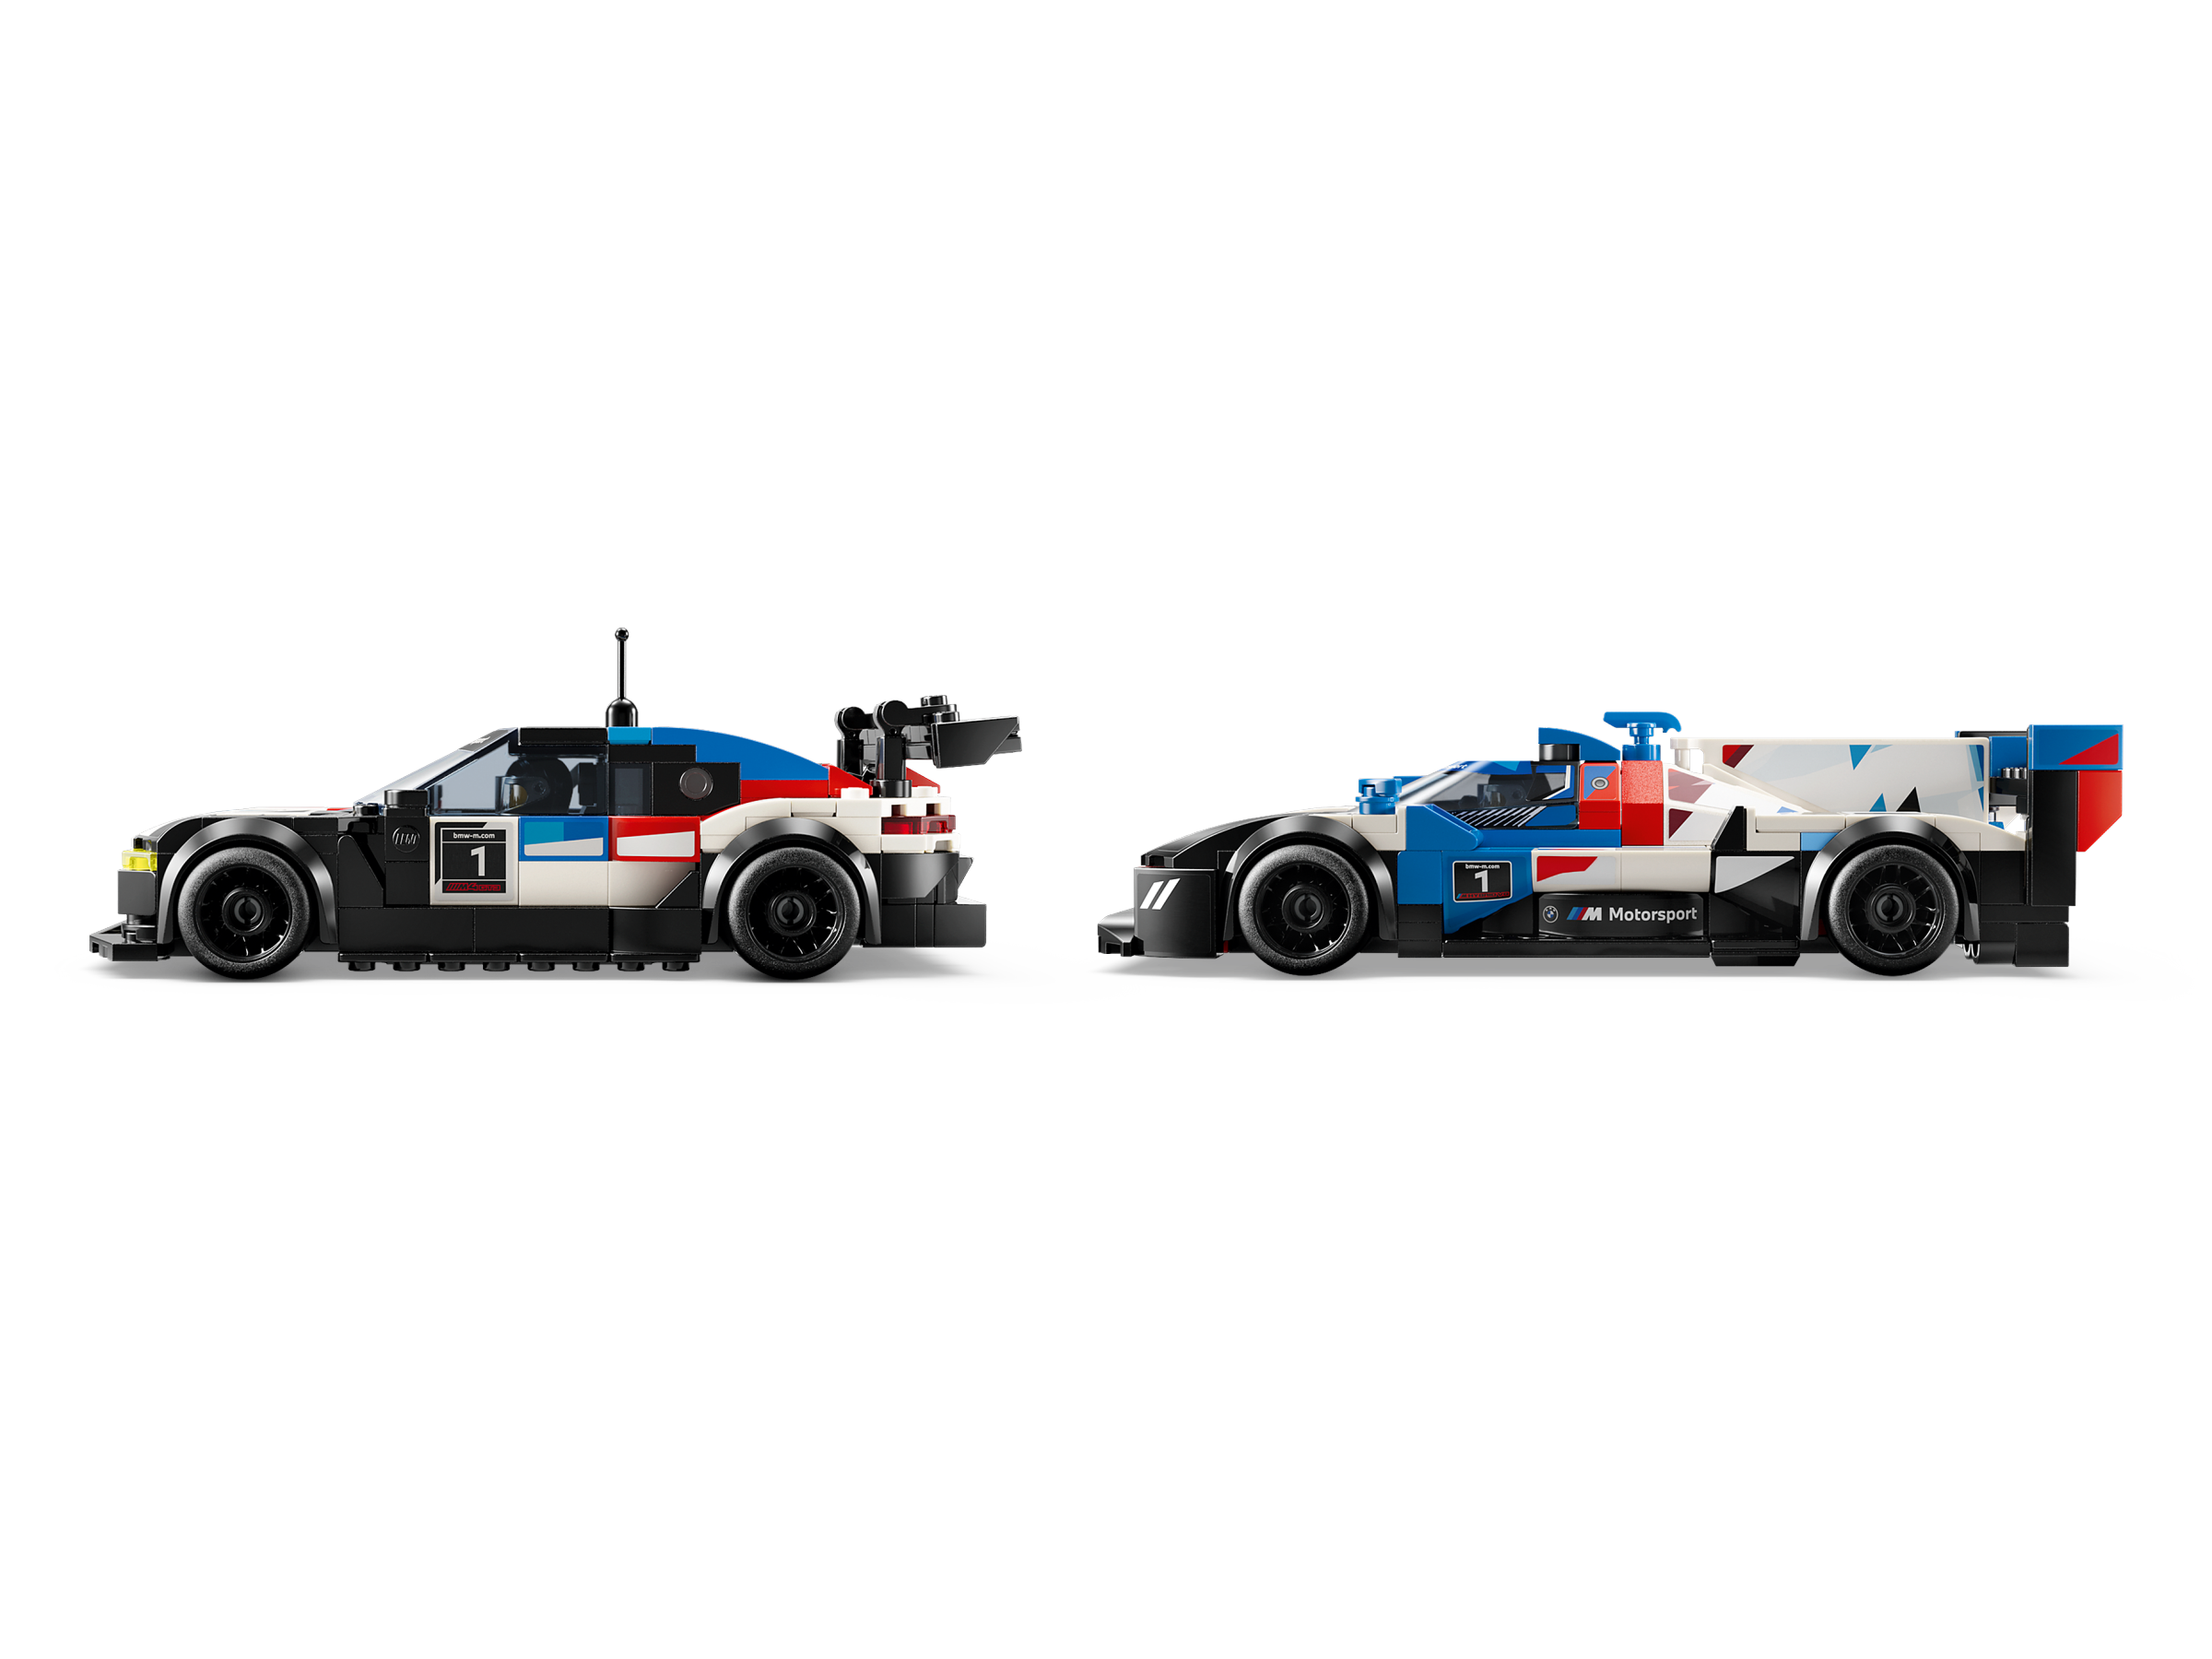 BMW M4 GT3 & BMW M Hybrid V8 Race Cars 76922 | Speed Champions | Buy online  at the Official LEGO® Shop US